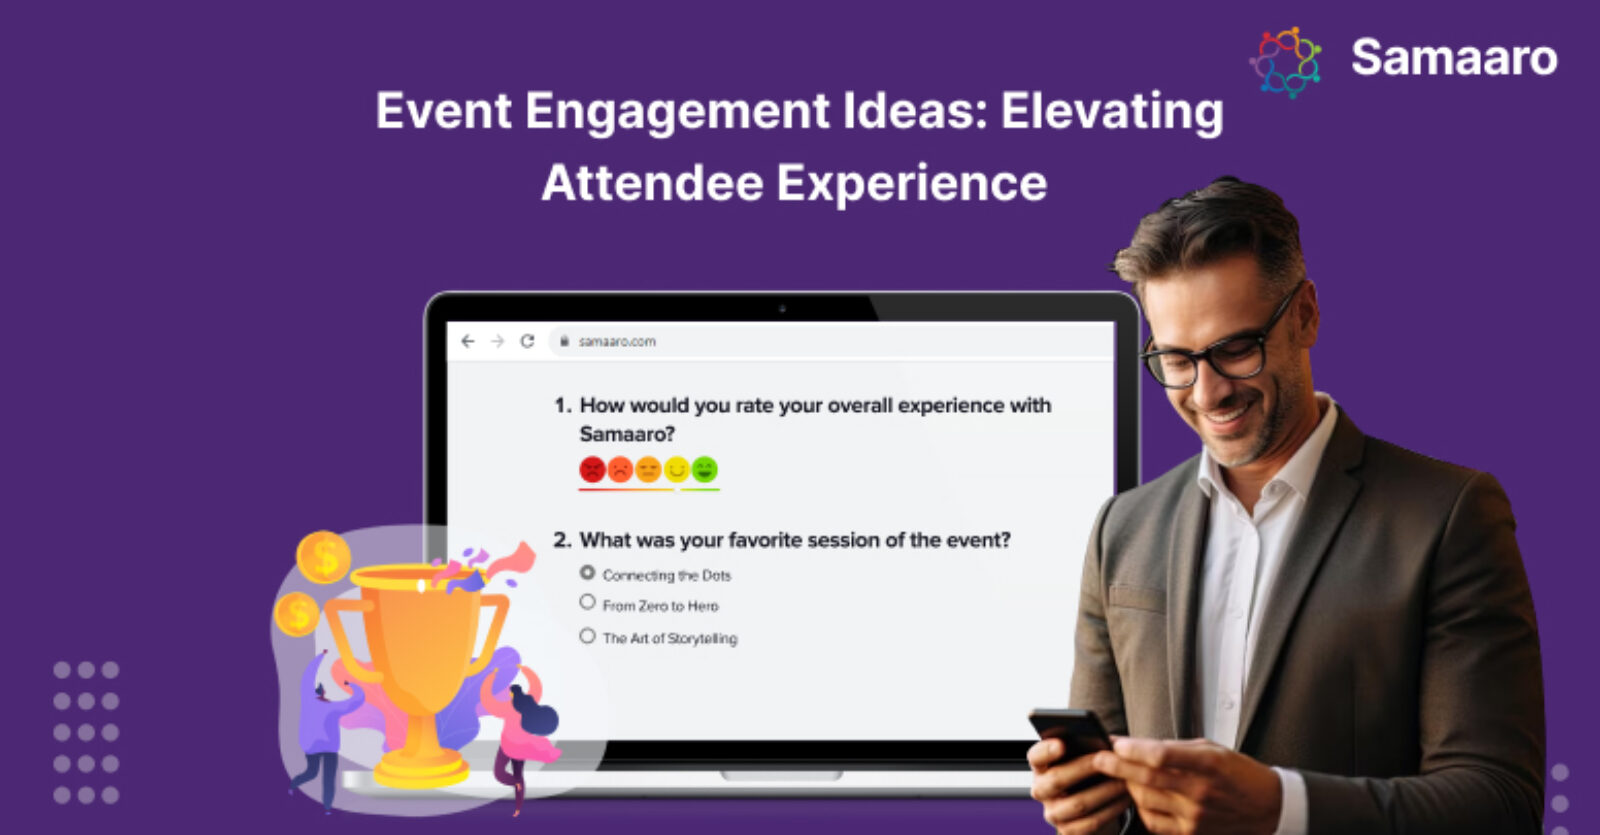 Event Engagement Ideas: Elevating Attendee Experience 